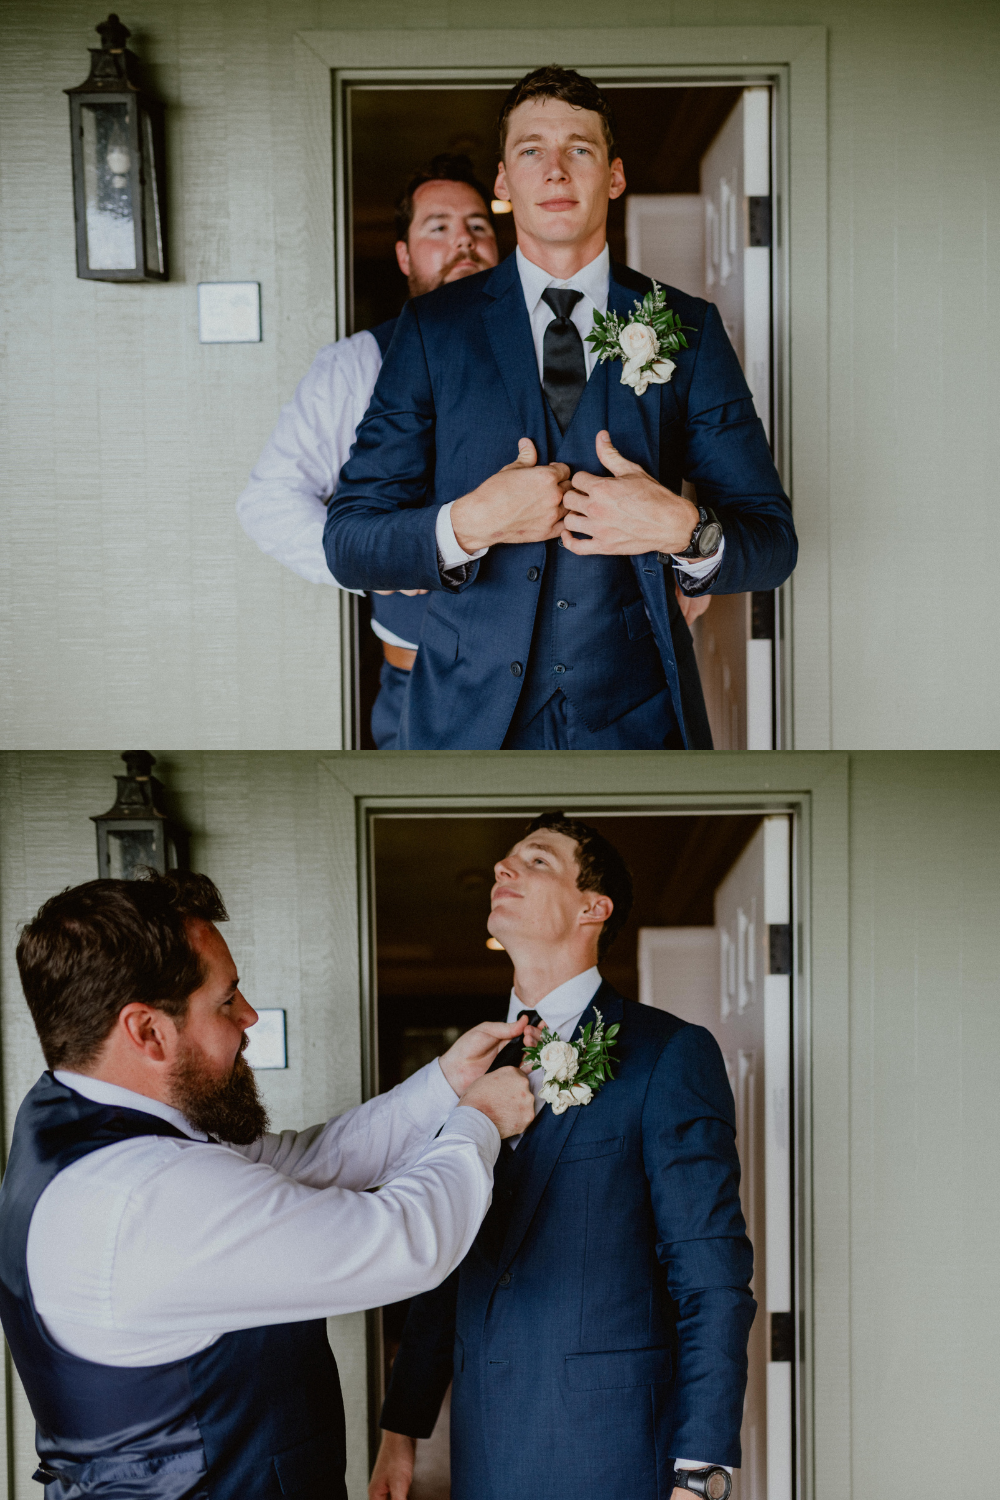 Groom fixes dark blue suit and black tie on wedding day wearing white rose boutonniere | Oahu Wedding Photographer, Oahu Elopement Photographer, Destination Wedding Photographer, Destination Elopement Photographer, Newlywed moments ideas, Newlywed Photography inspiration, Hawaii Elopement ideas | chelseaabril.com